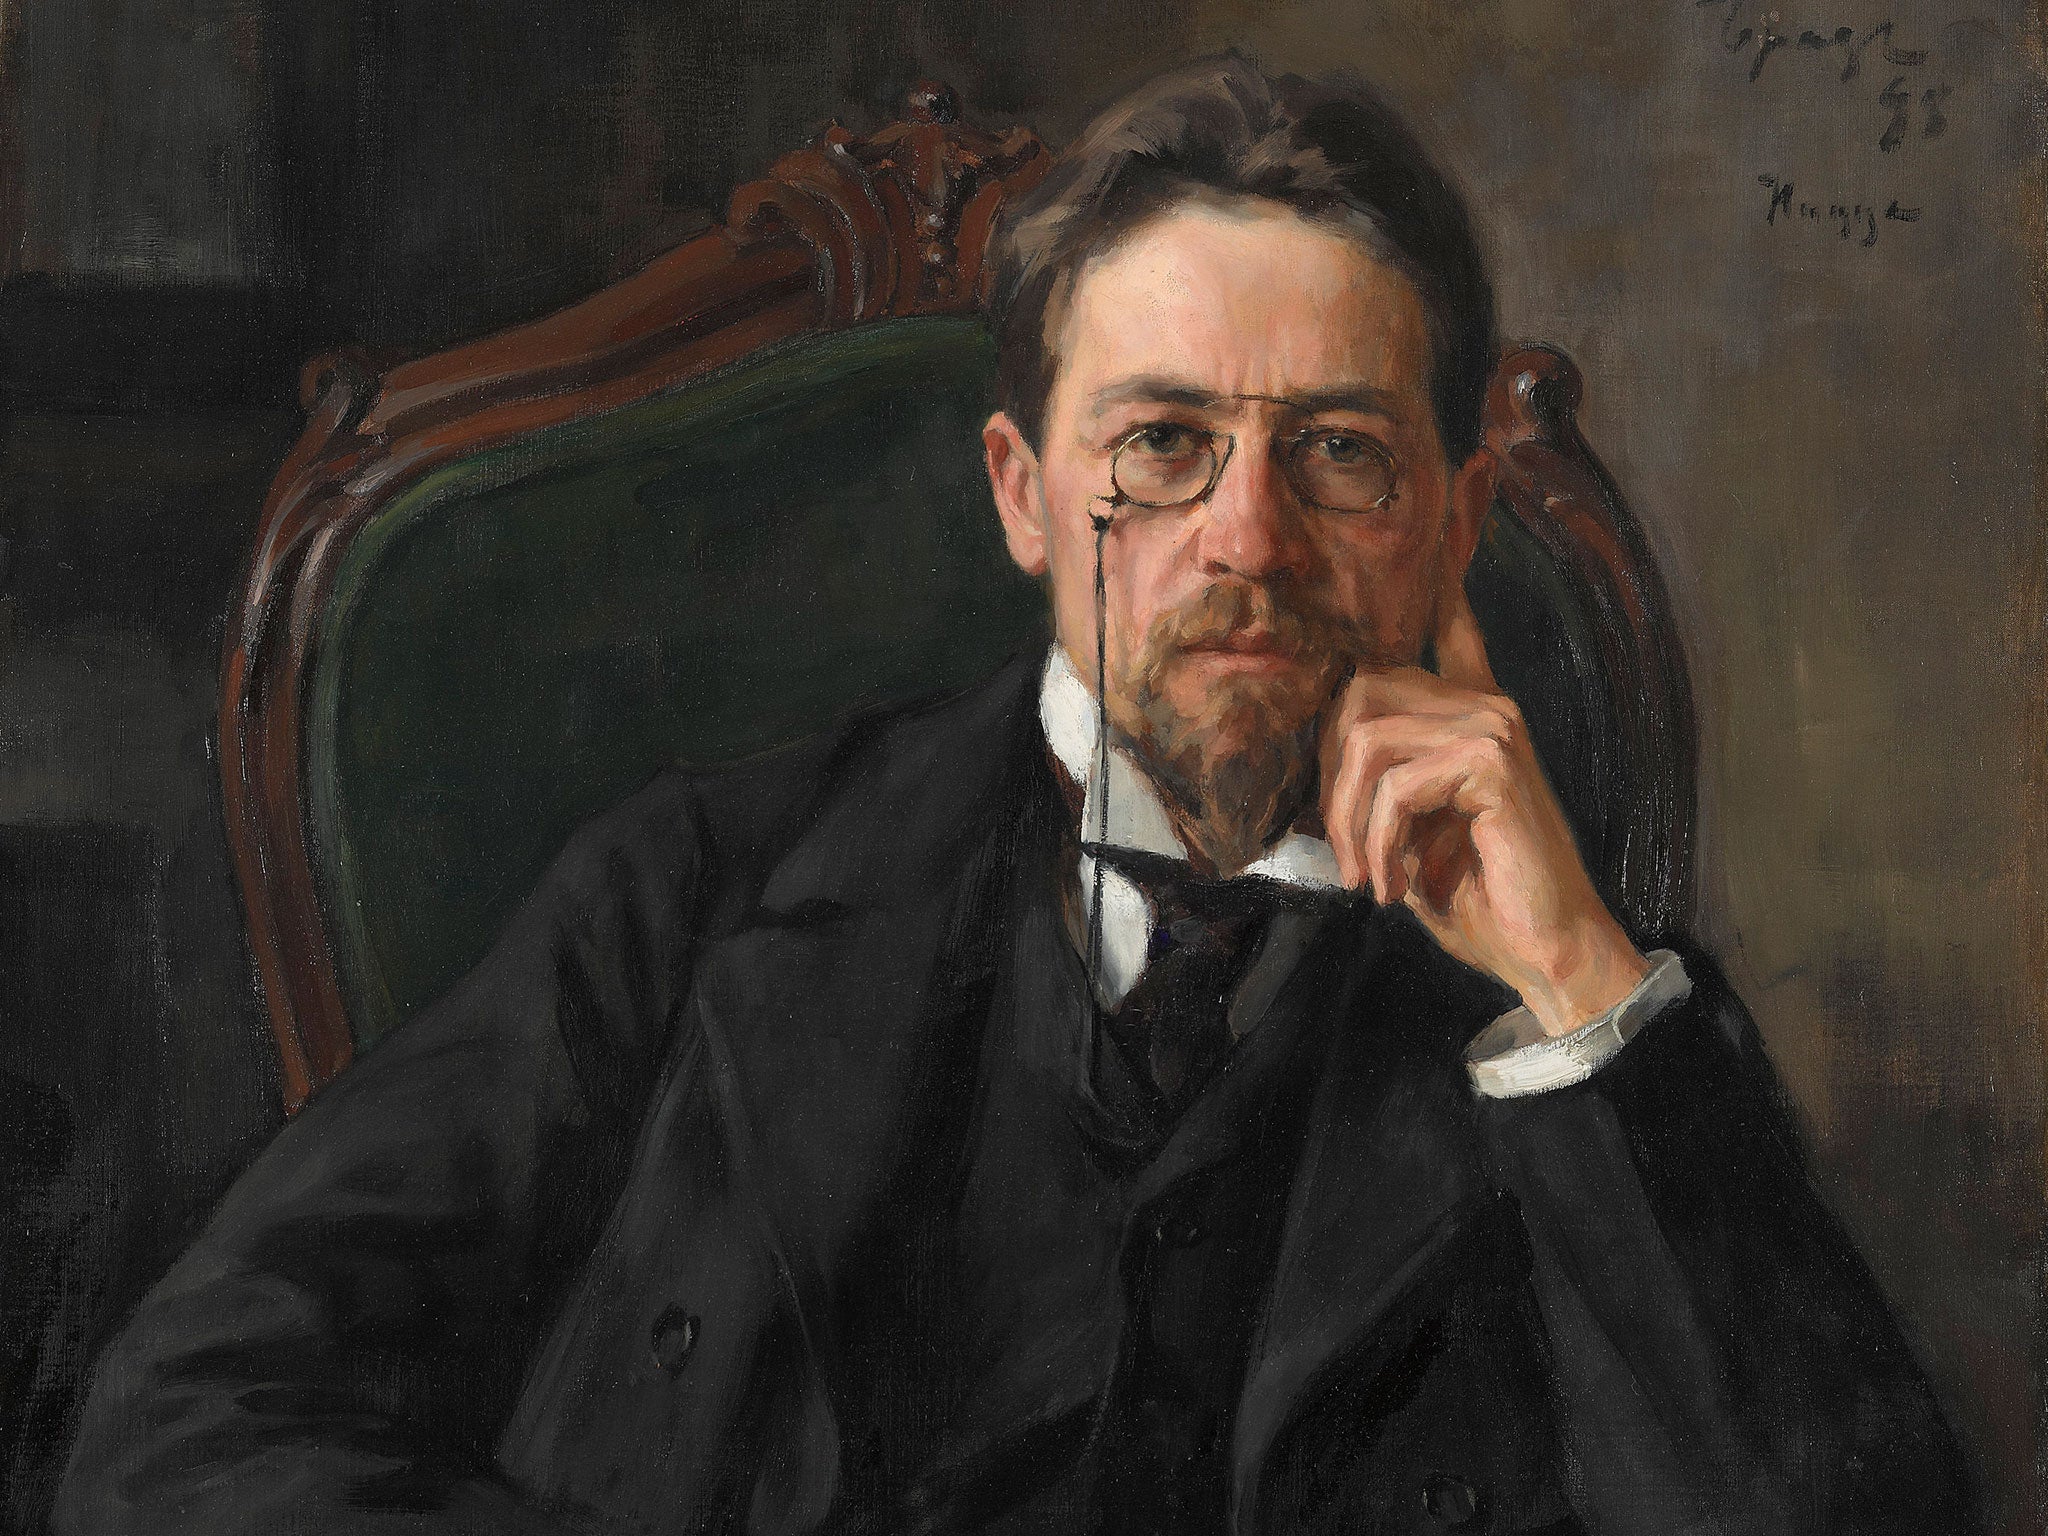 A painting of Anton Chekhov, which will go on display in London